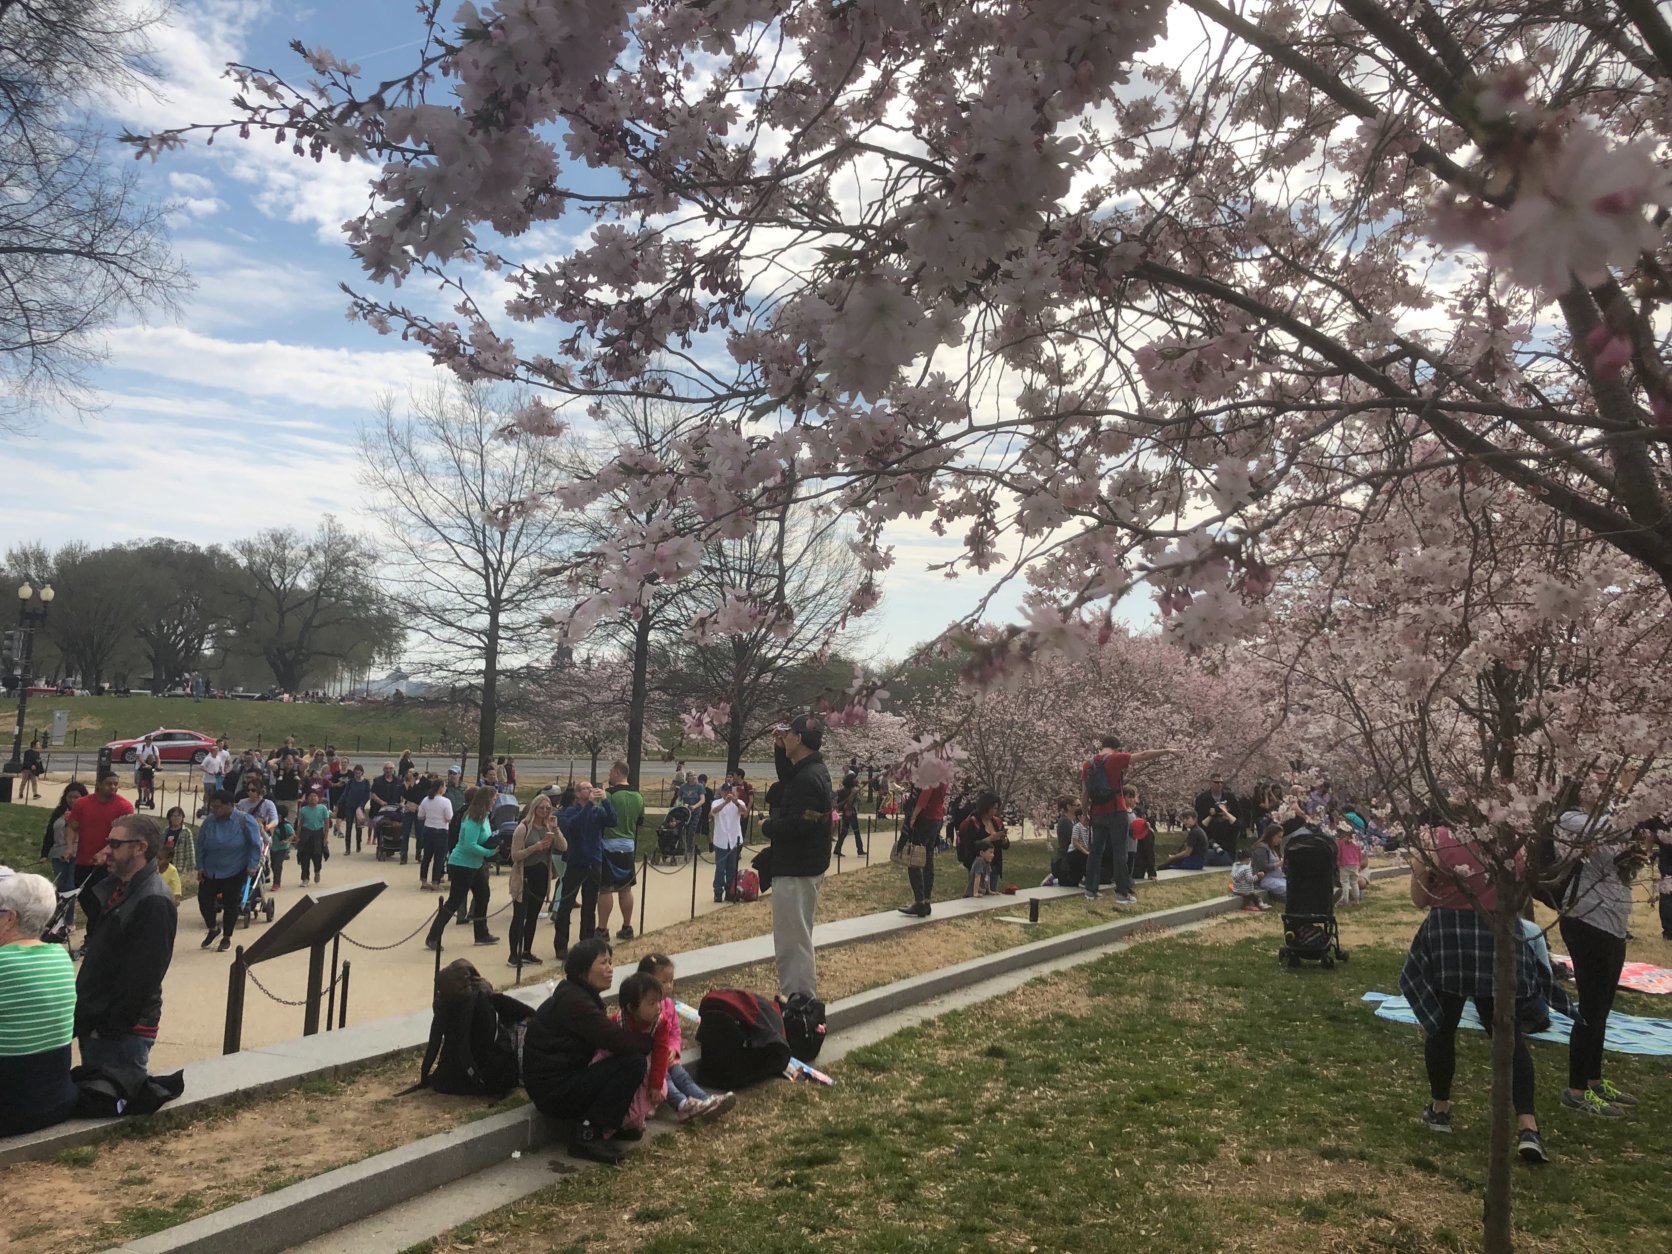  People rest under the cherry blossoms on March 30, 2019. (WTOP/Melissa Howell)